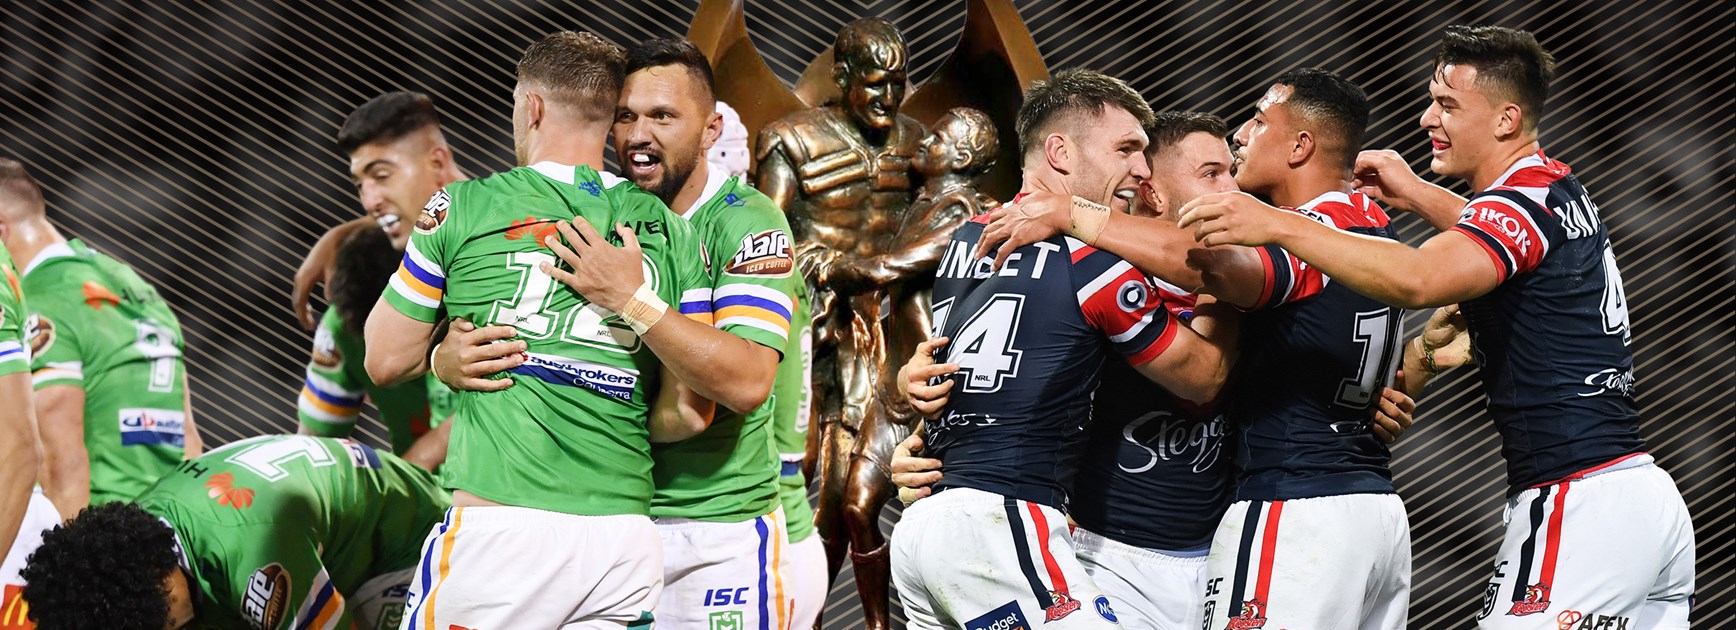 Grand final winner: NRL.com experts have their say